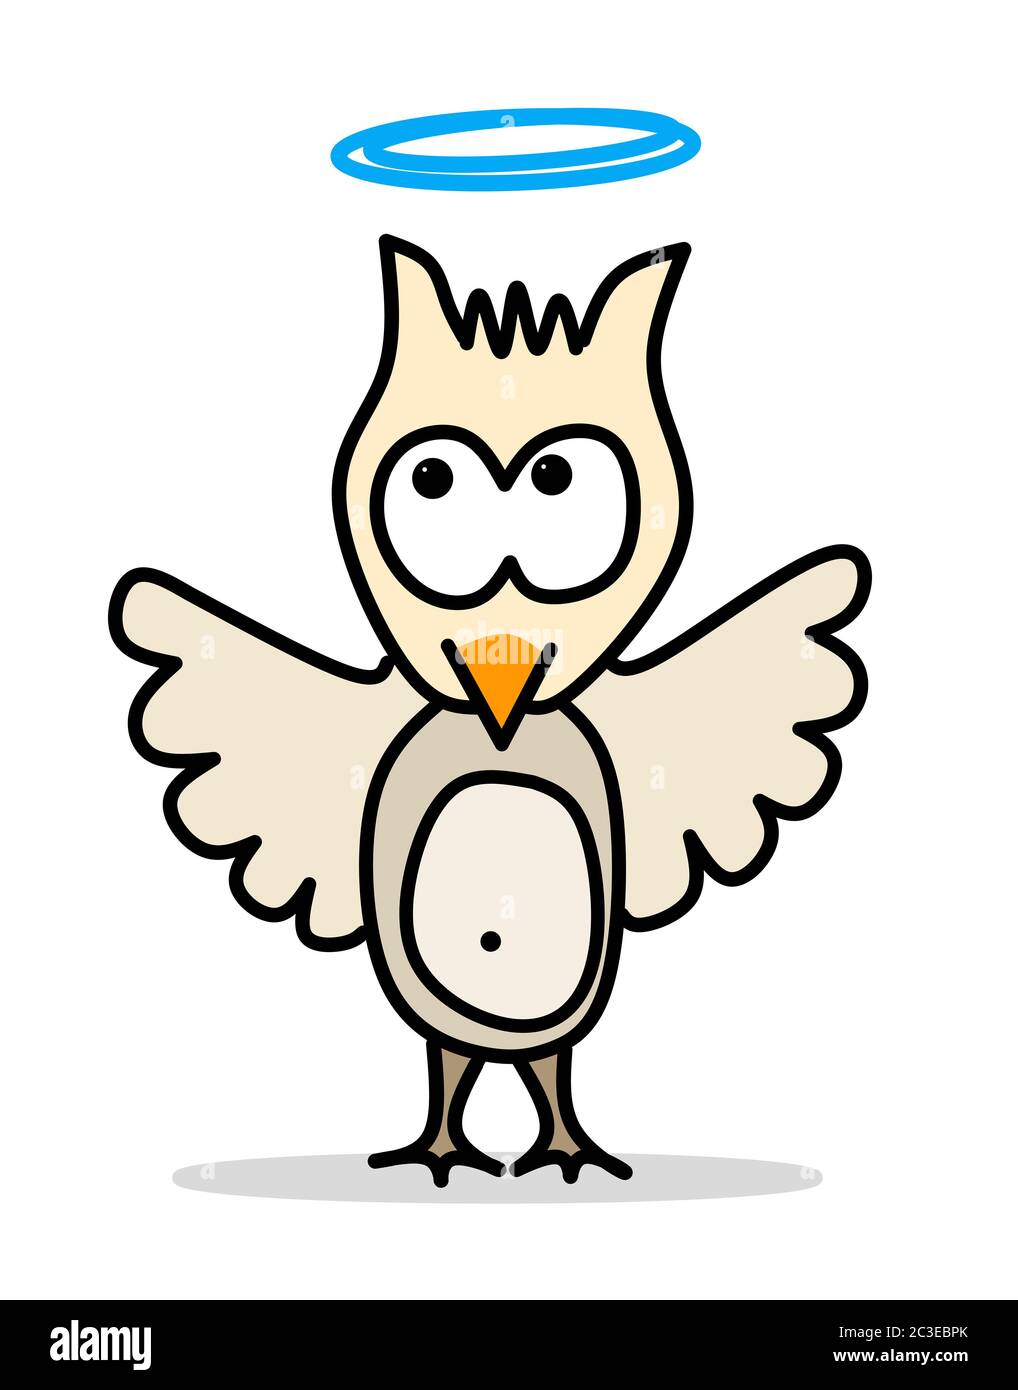 comic character small owl with blue halo Stock Photo